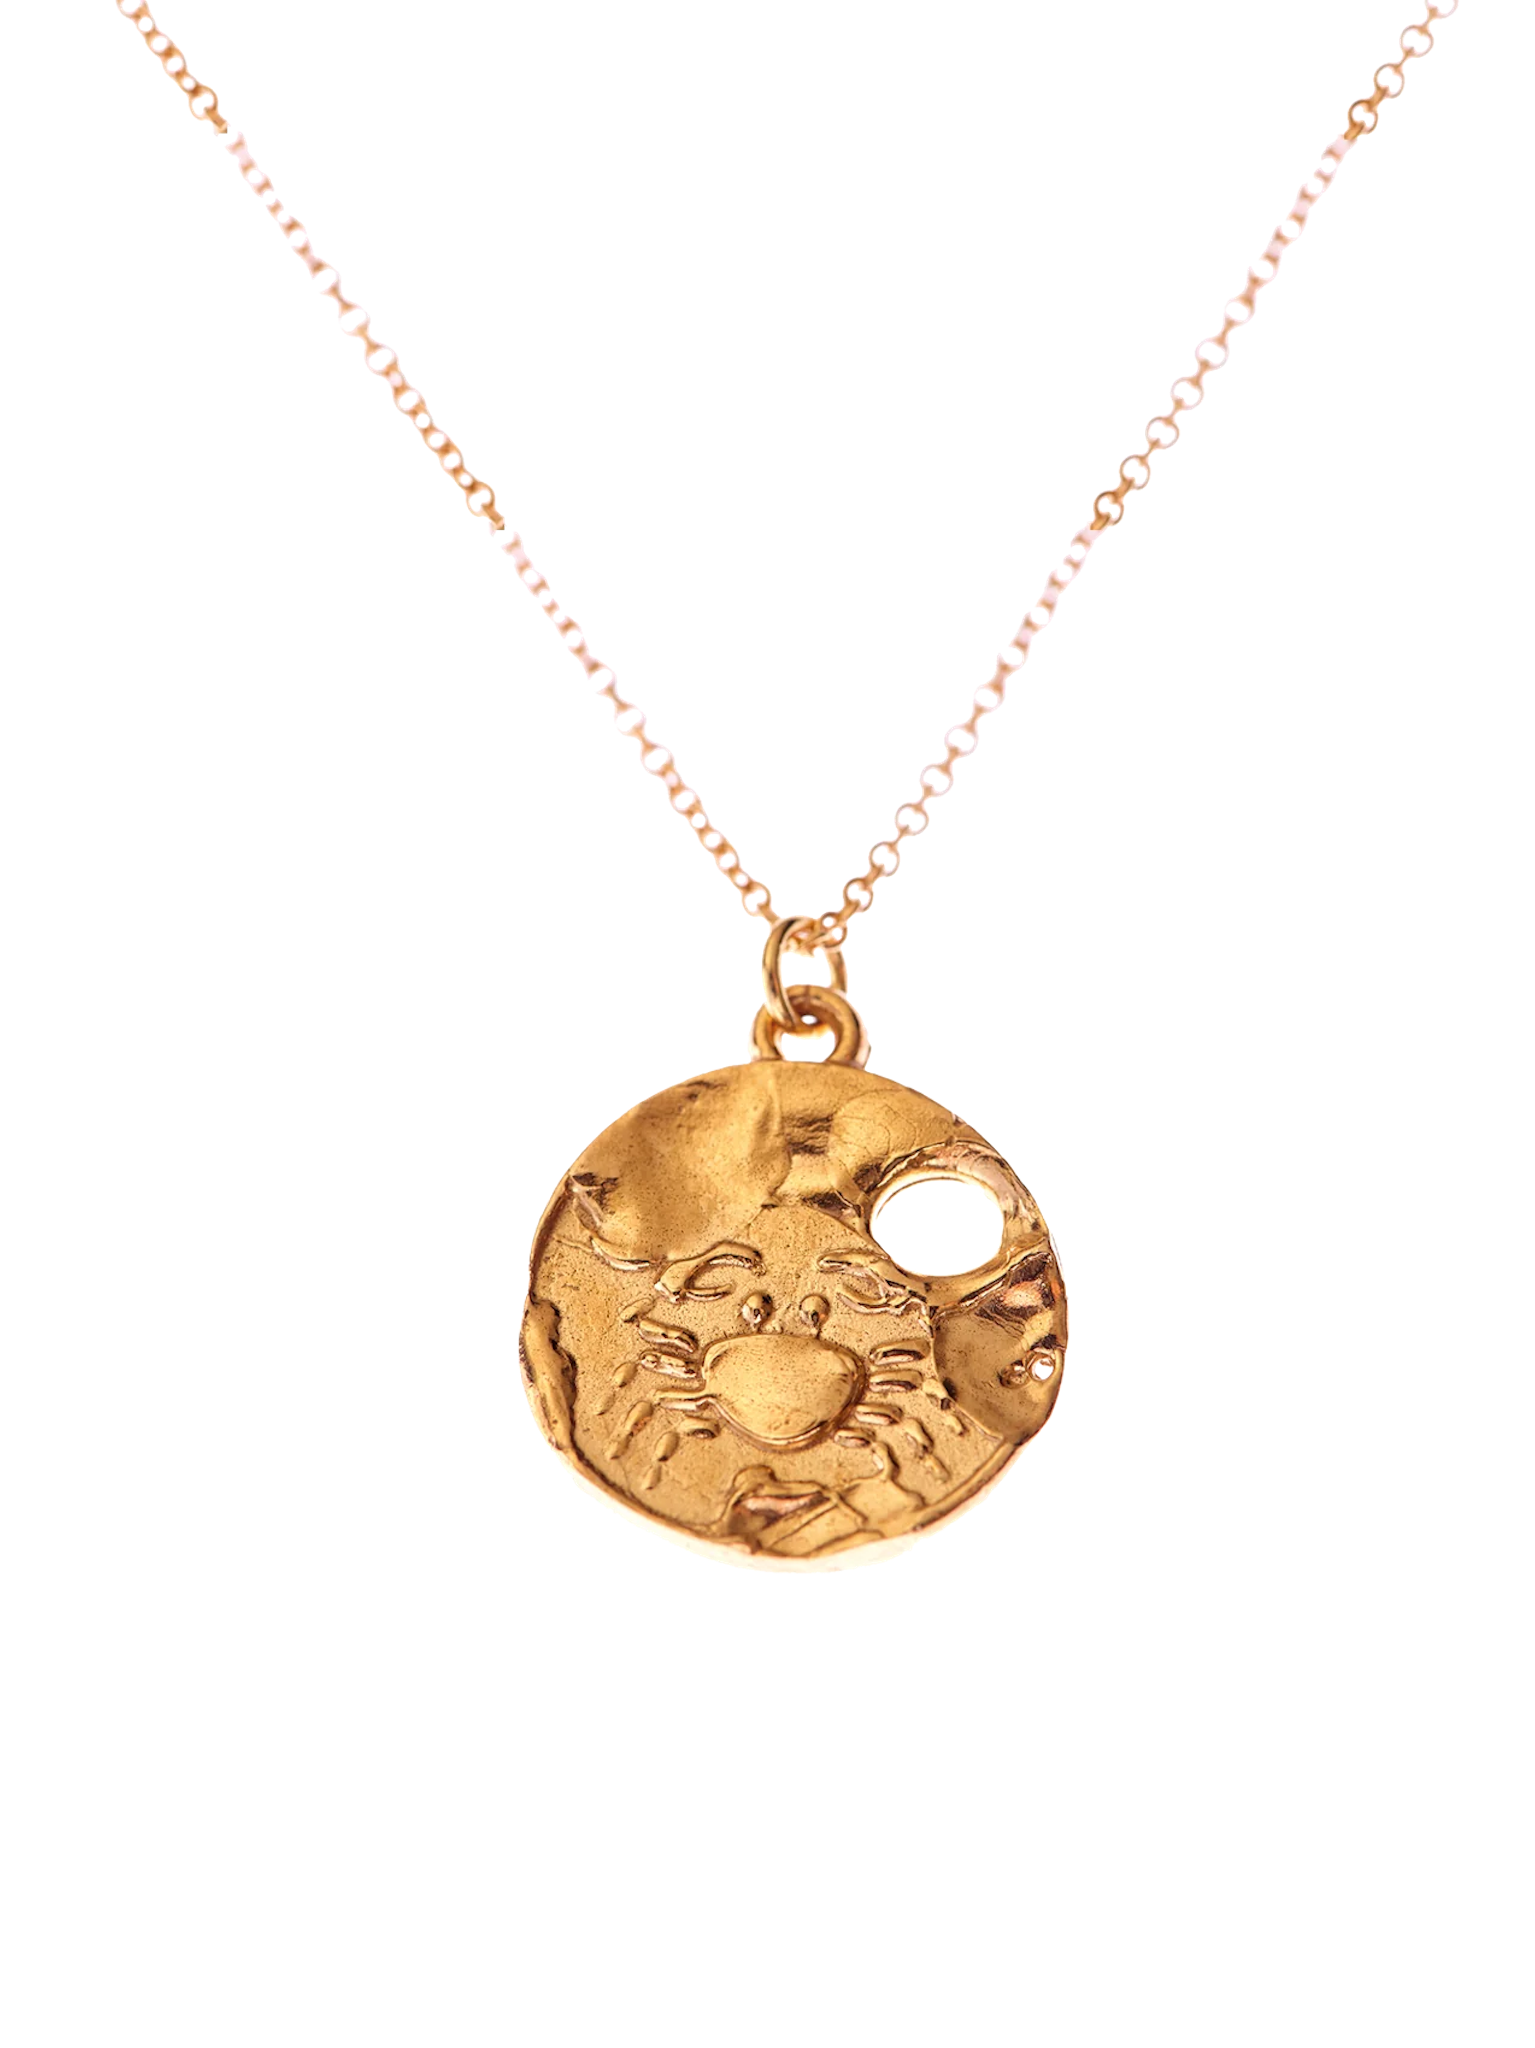 The cancer medallion necklace